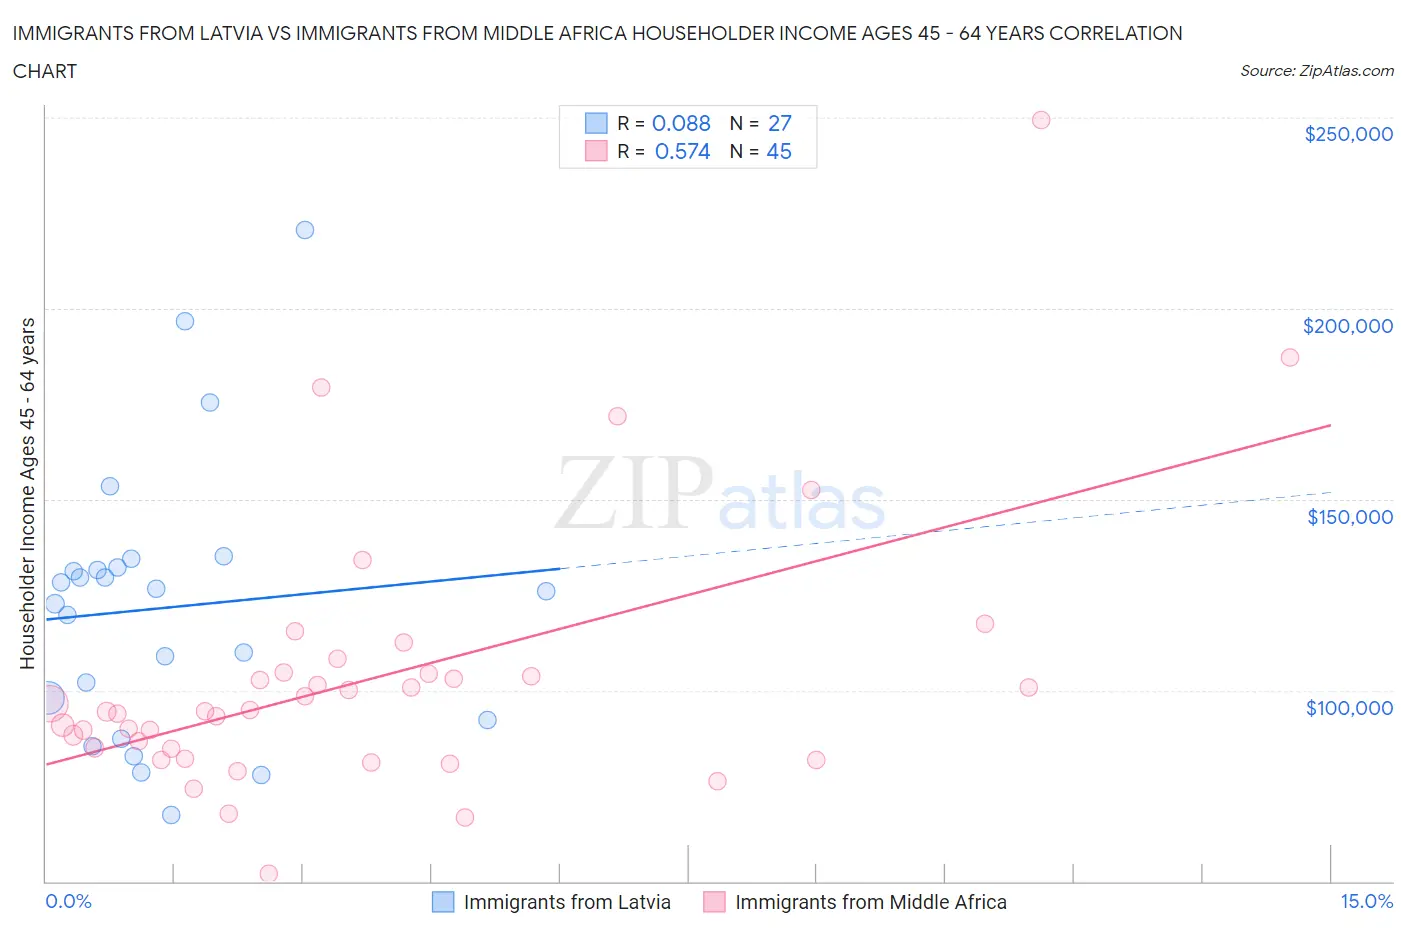 Immigrants from Latvia vs Immigrants from Middle Africa Householder Income Ages 45 - 64 years